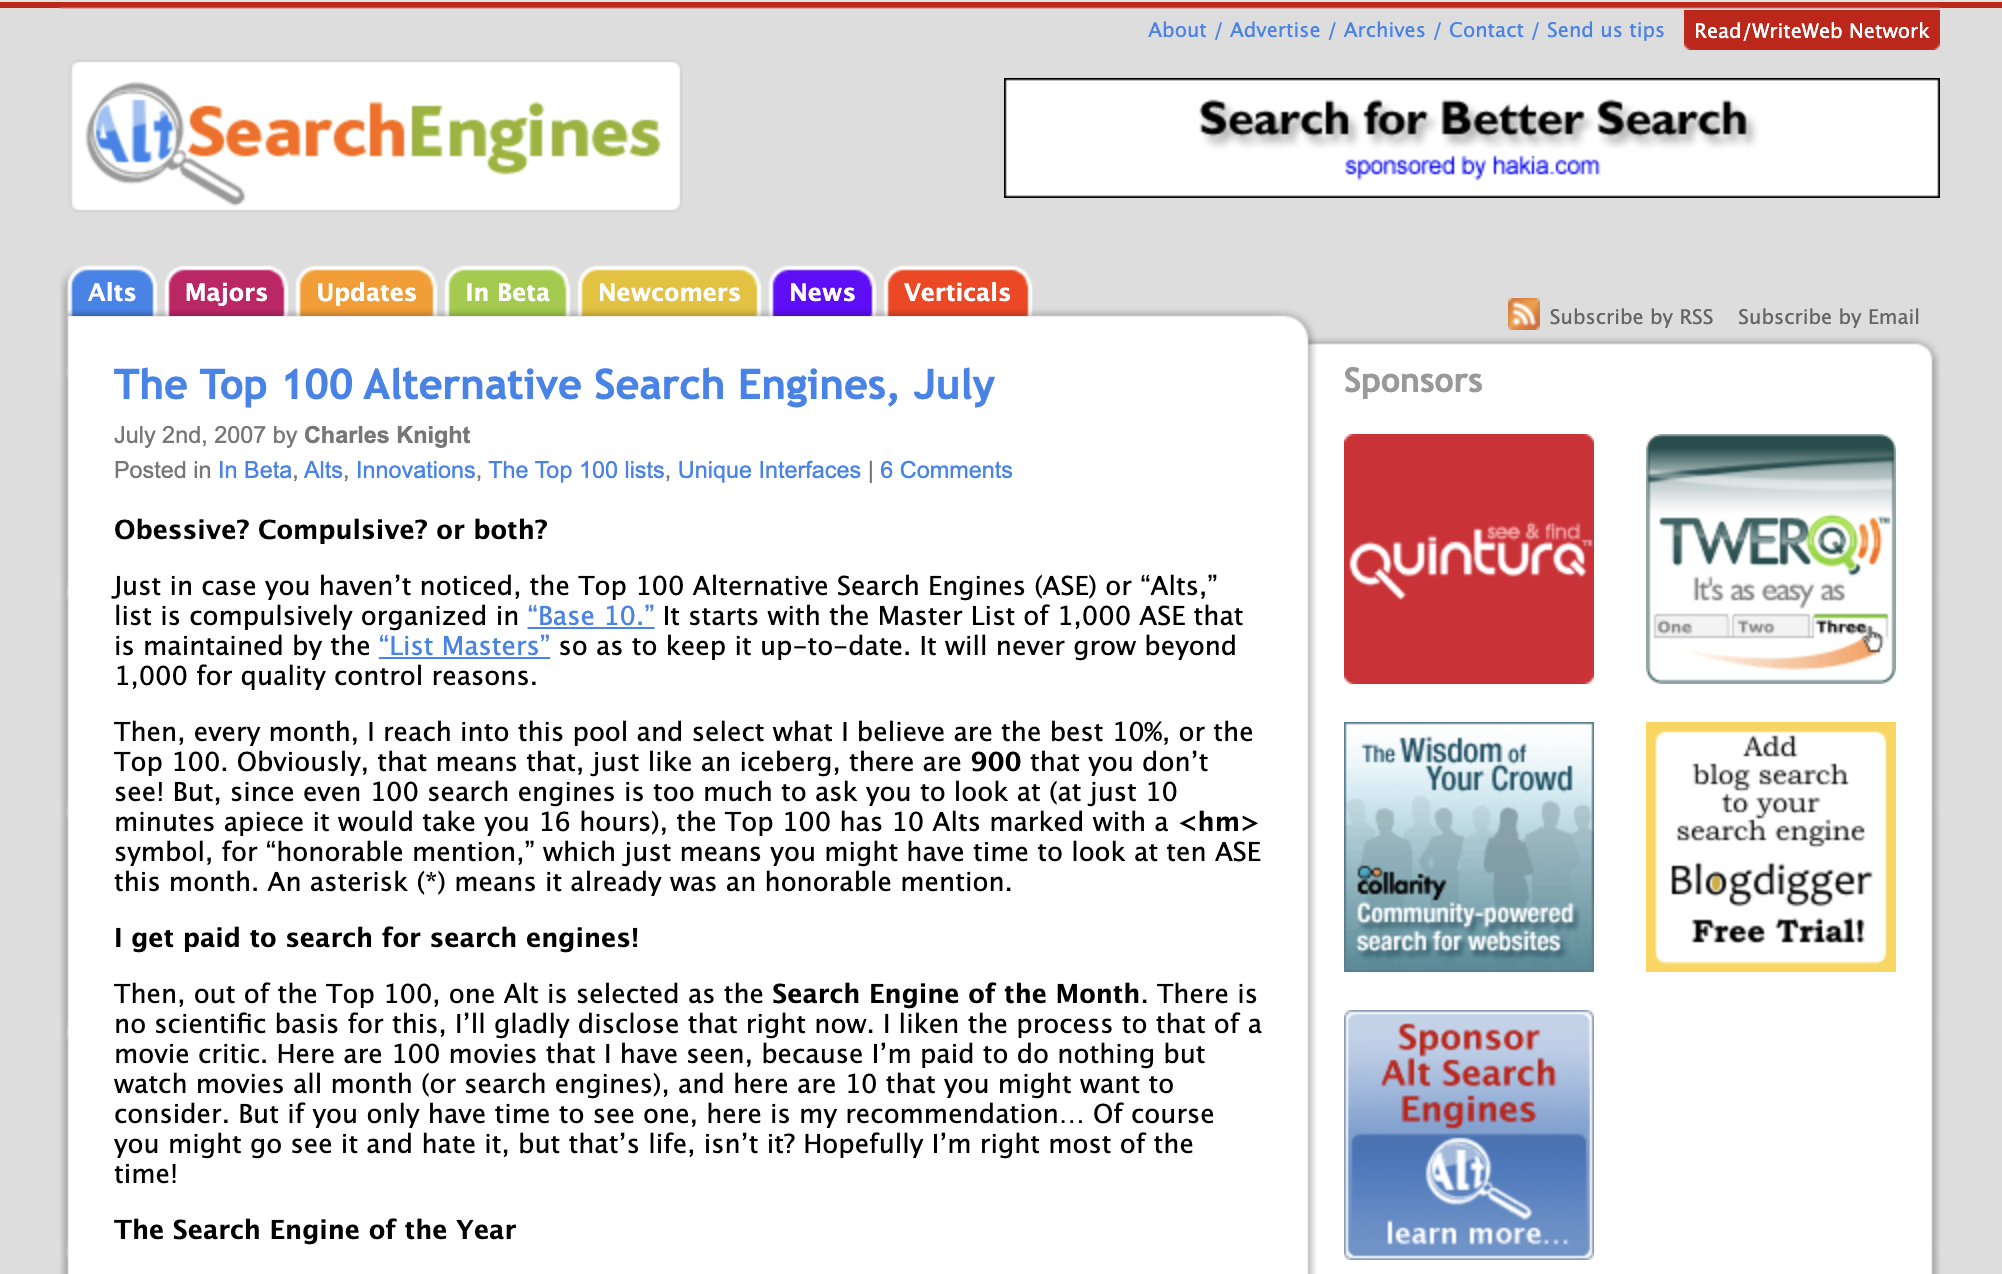 AltSearchEngines; screenshot from early July 2007.